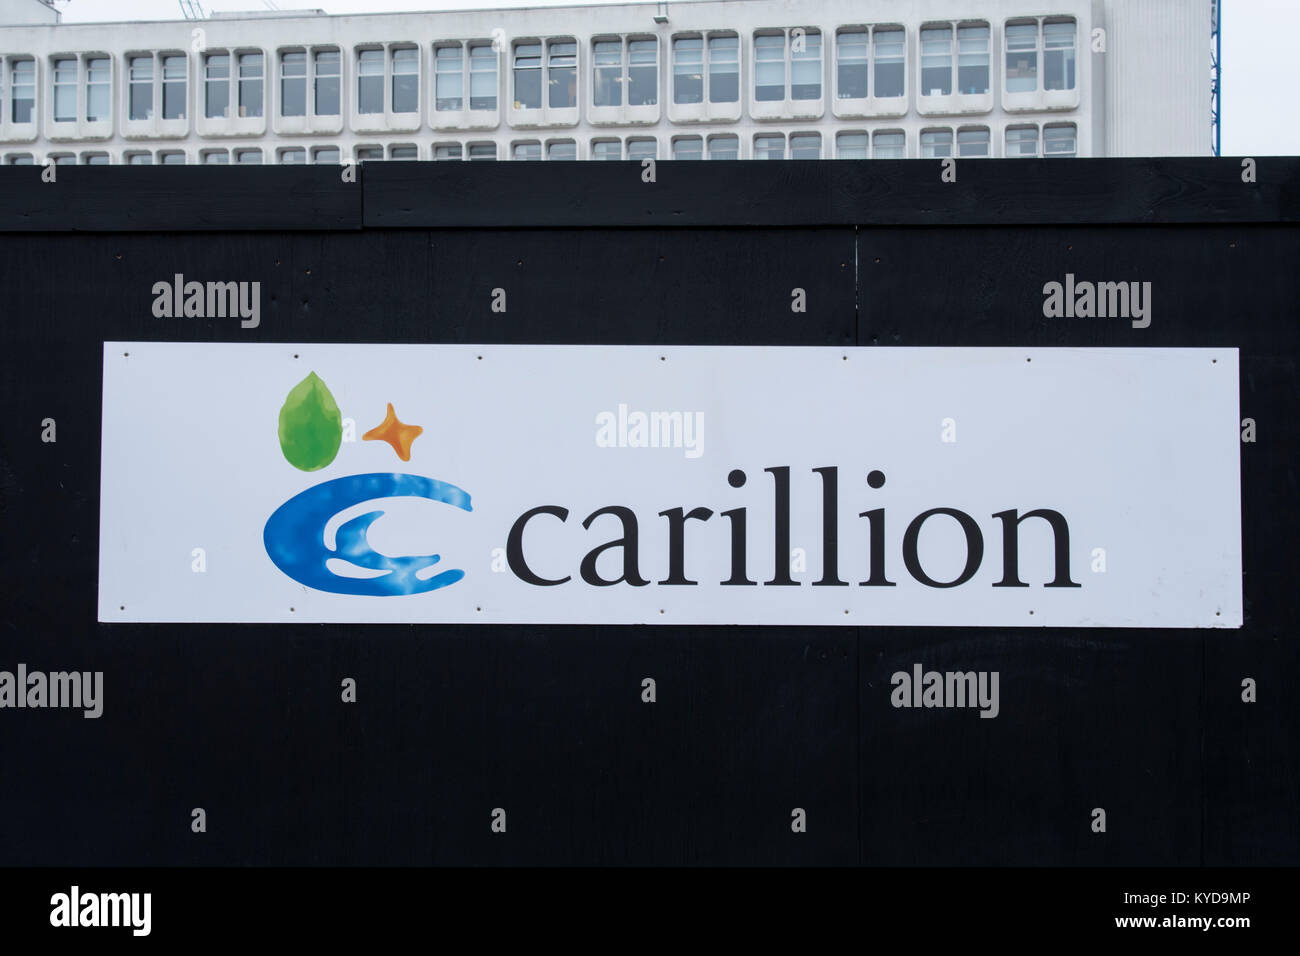 Wolverhampton, Britain, UK. 14th. January 2018: Carillion the construction and outsourcing company which is based in Wolverhampton and has contracts with several public sector projects such as HS2 and NHS projects, is currently in talks with the government in an attempt to prevent the collapse of the company due to a financial crisis and a plummeting share price. Stock Photo